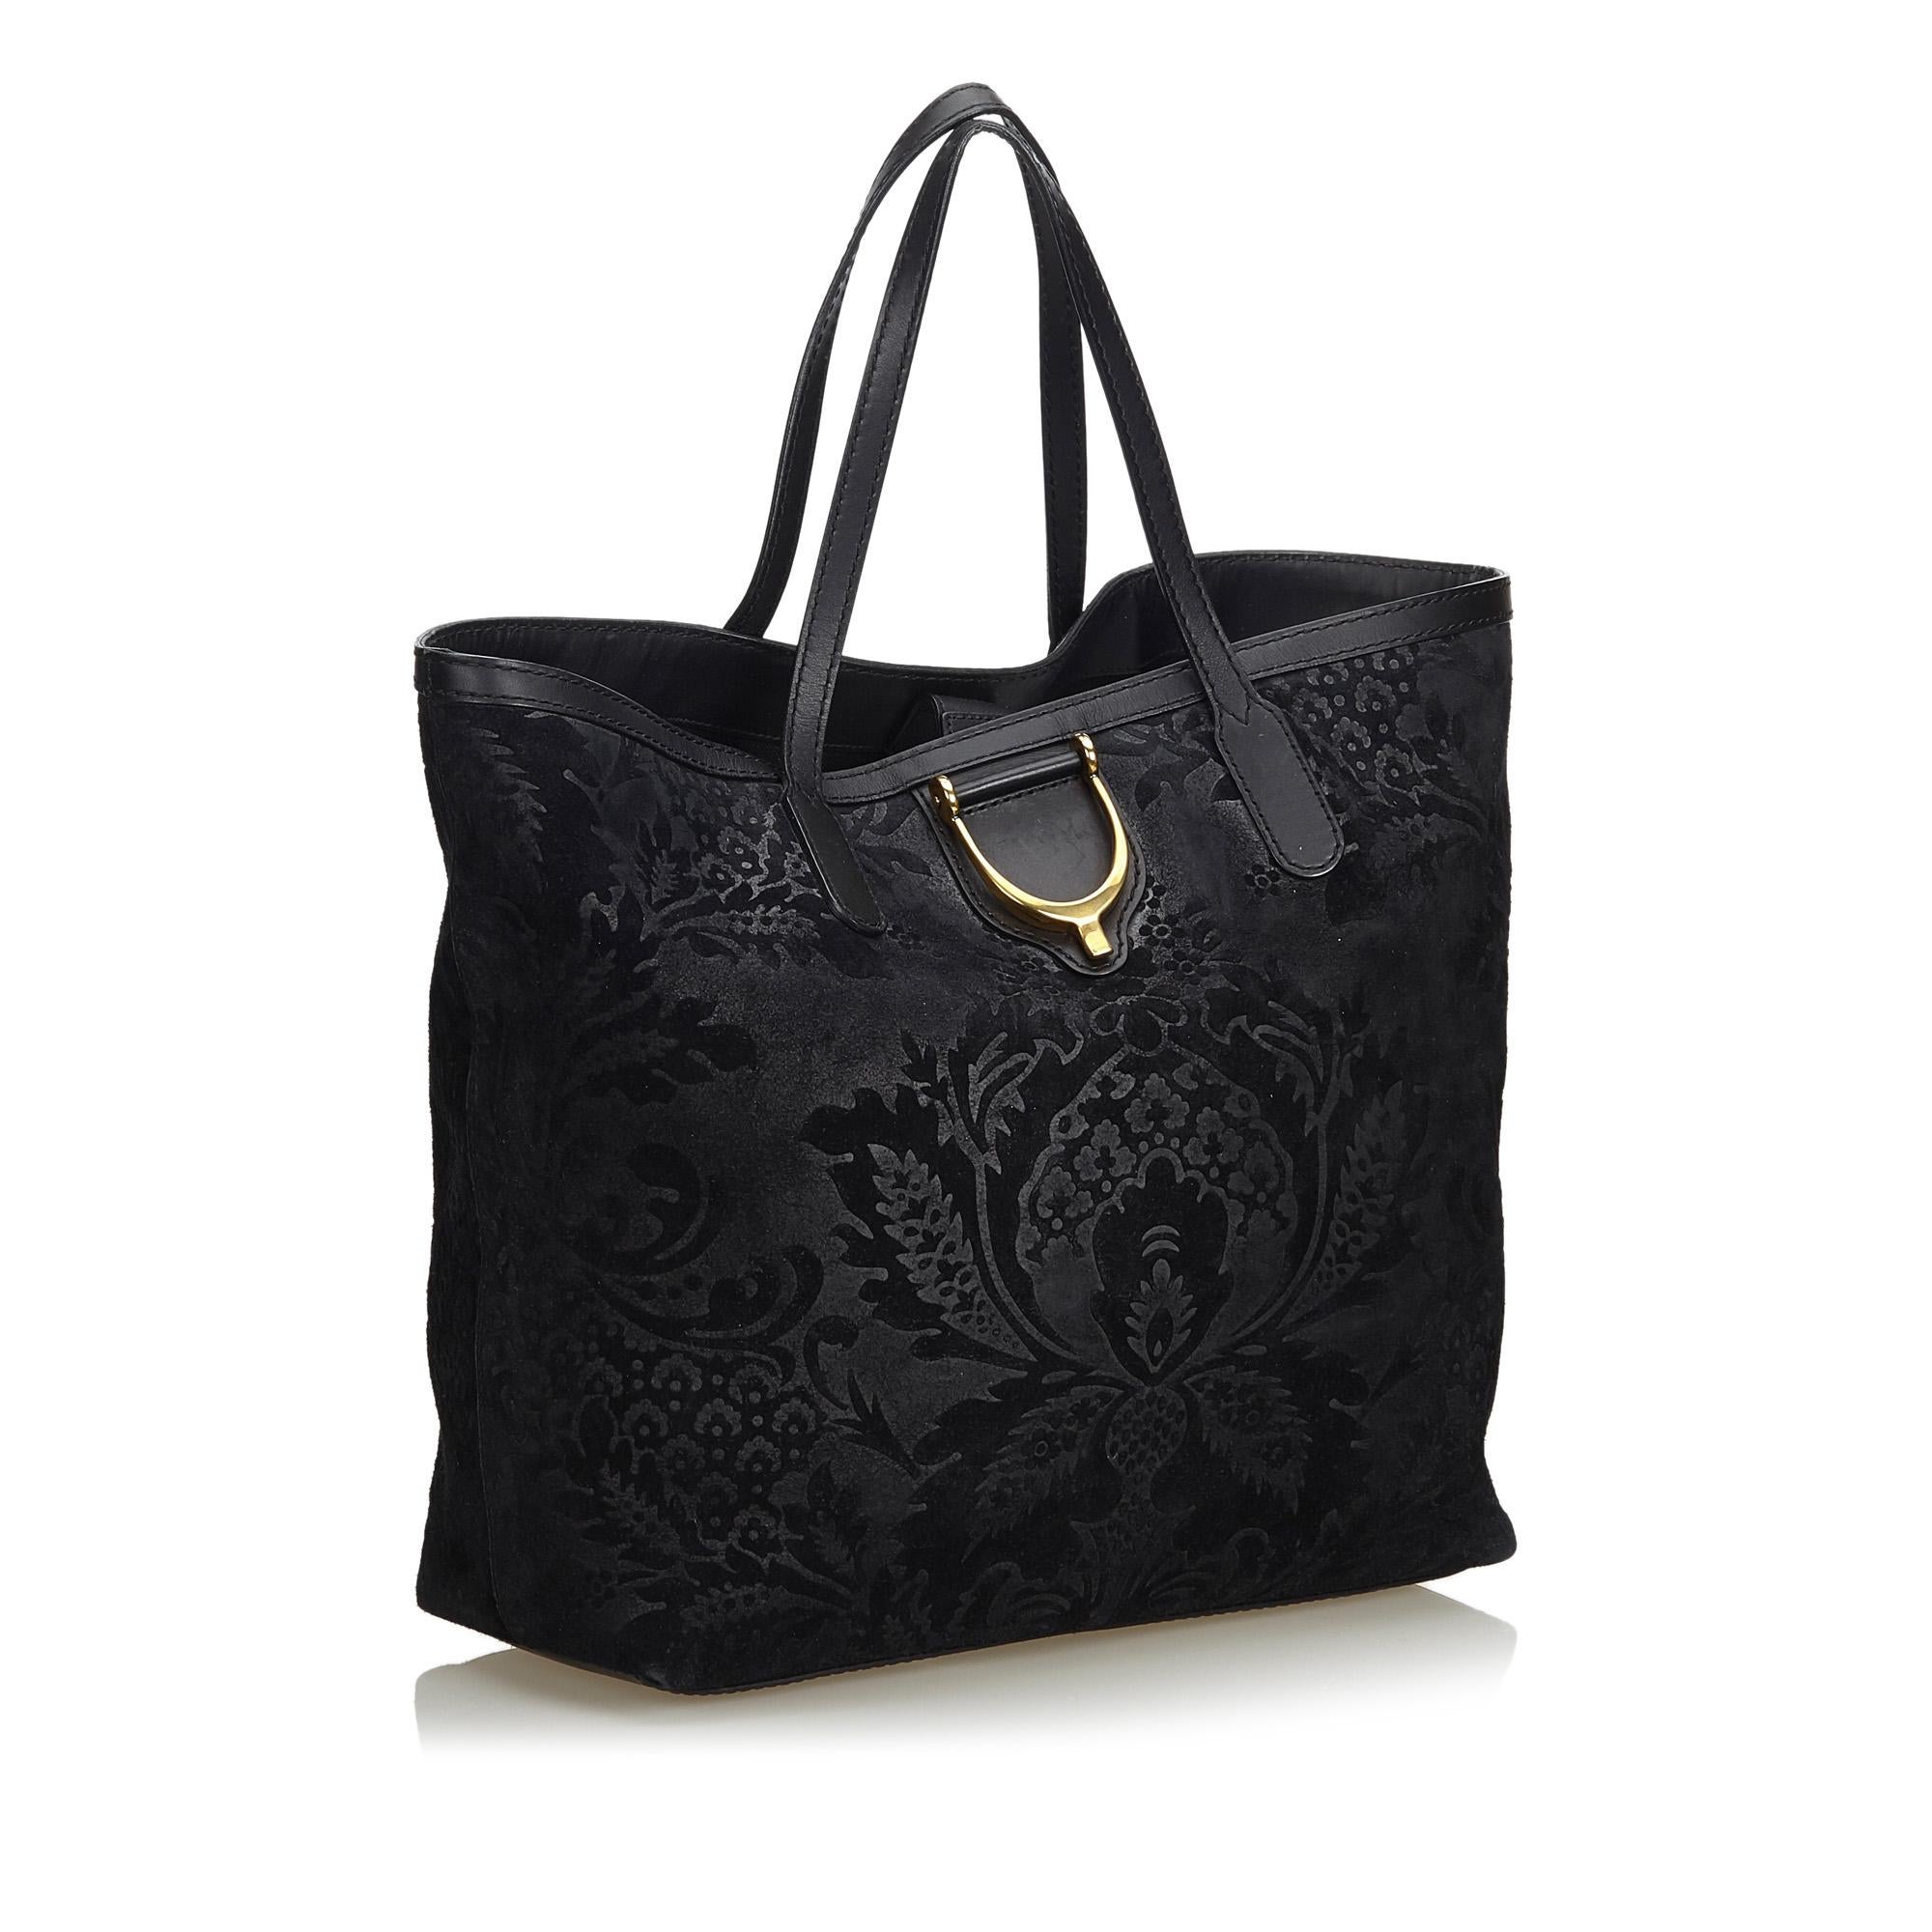 The Stirrup tote bag features a suede brocade body with gold-tone hardware, flat leather straps, an open top with magnetic snap button closure, and interior zip and slip pockets. It carries as B+ condition rating.

Inclusions: 
Dust